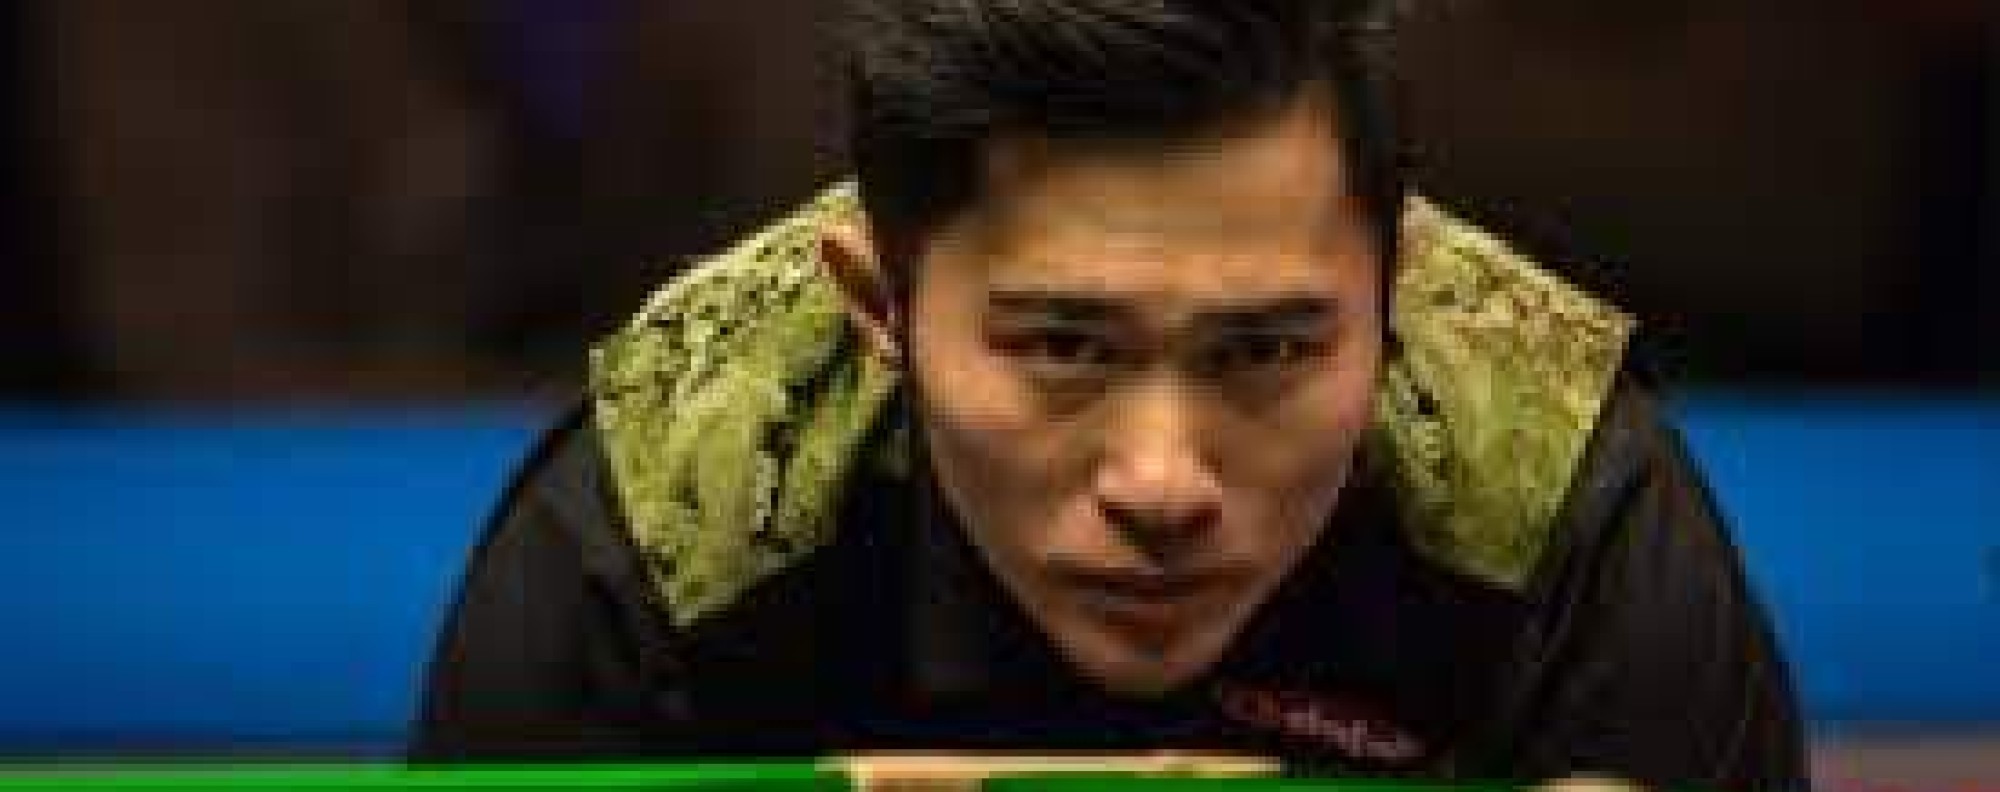 Match fixing in snooker how it works, why gamblers exploit the sport and who detects it South China Morning Post